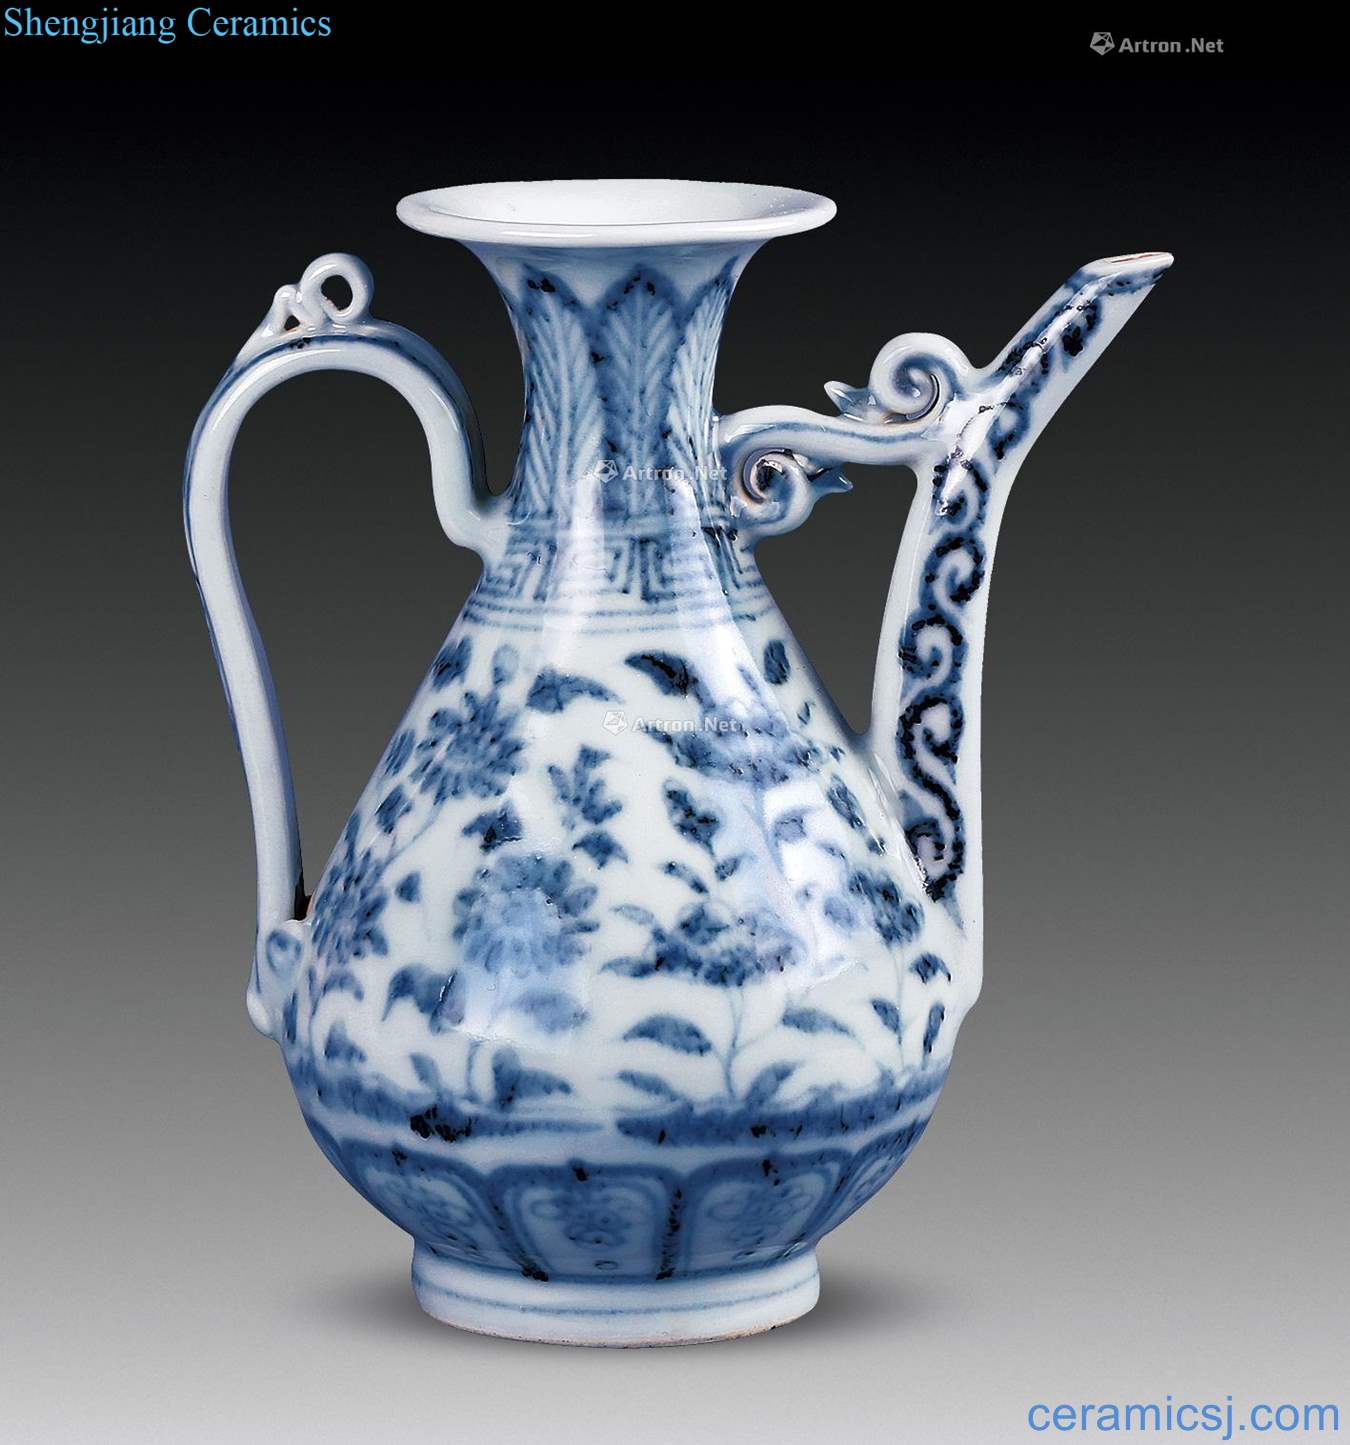 At the end of the yuan Ming Porcelain ewer (a)